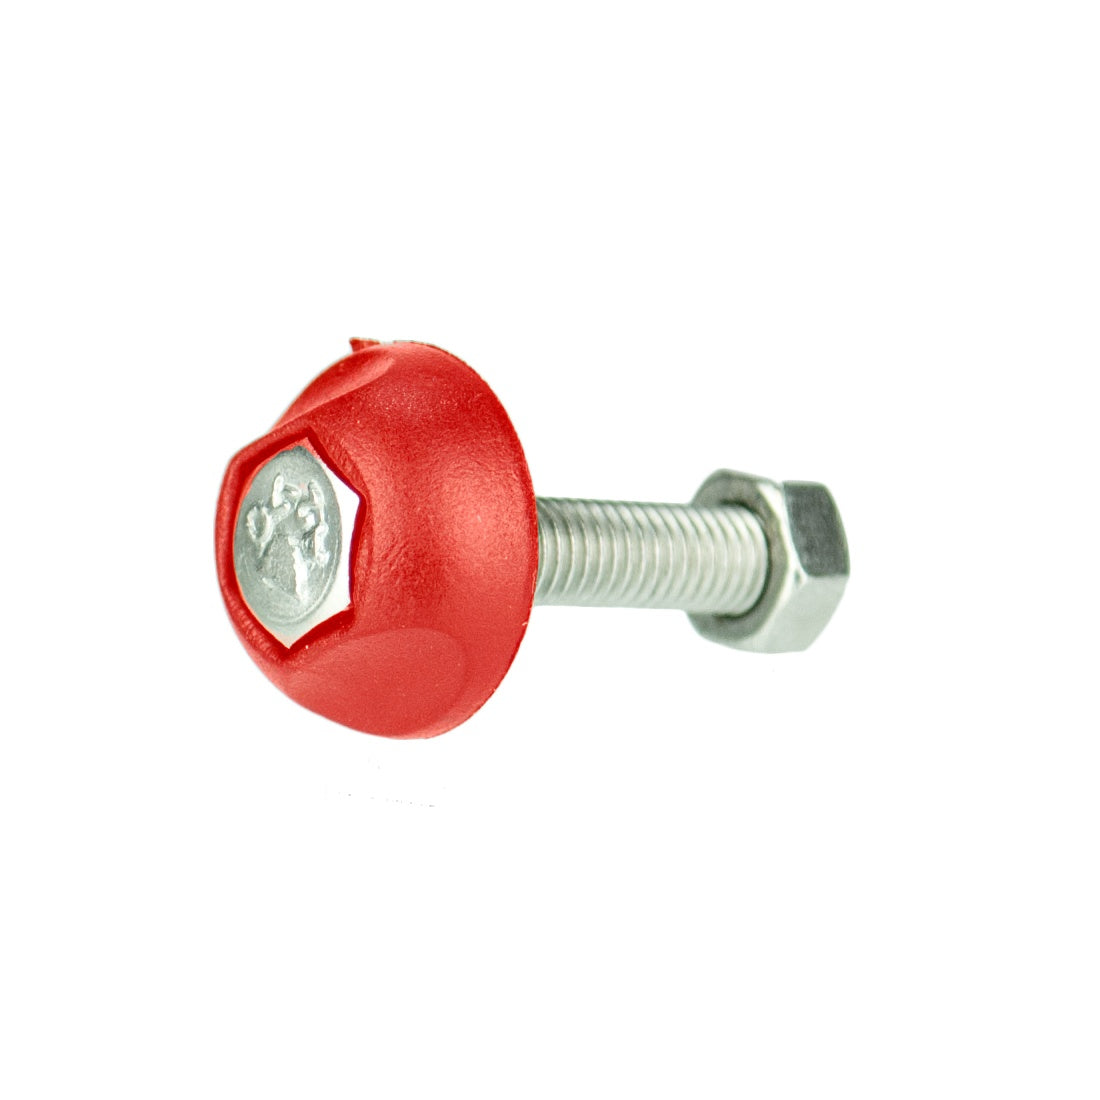 XERO-Clamp-Nut-Red-Tip-View